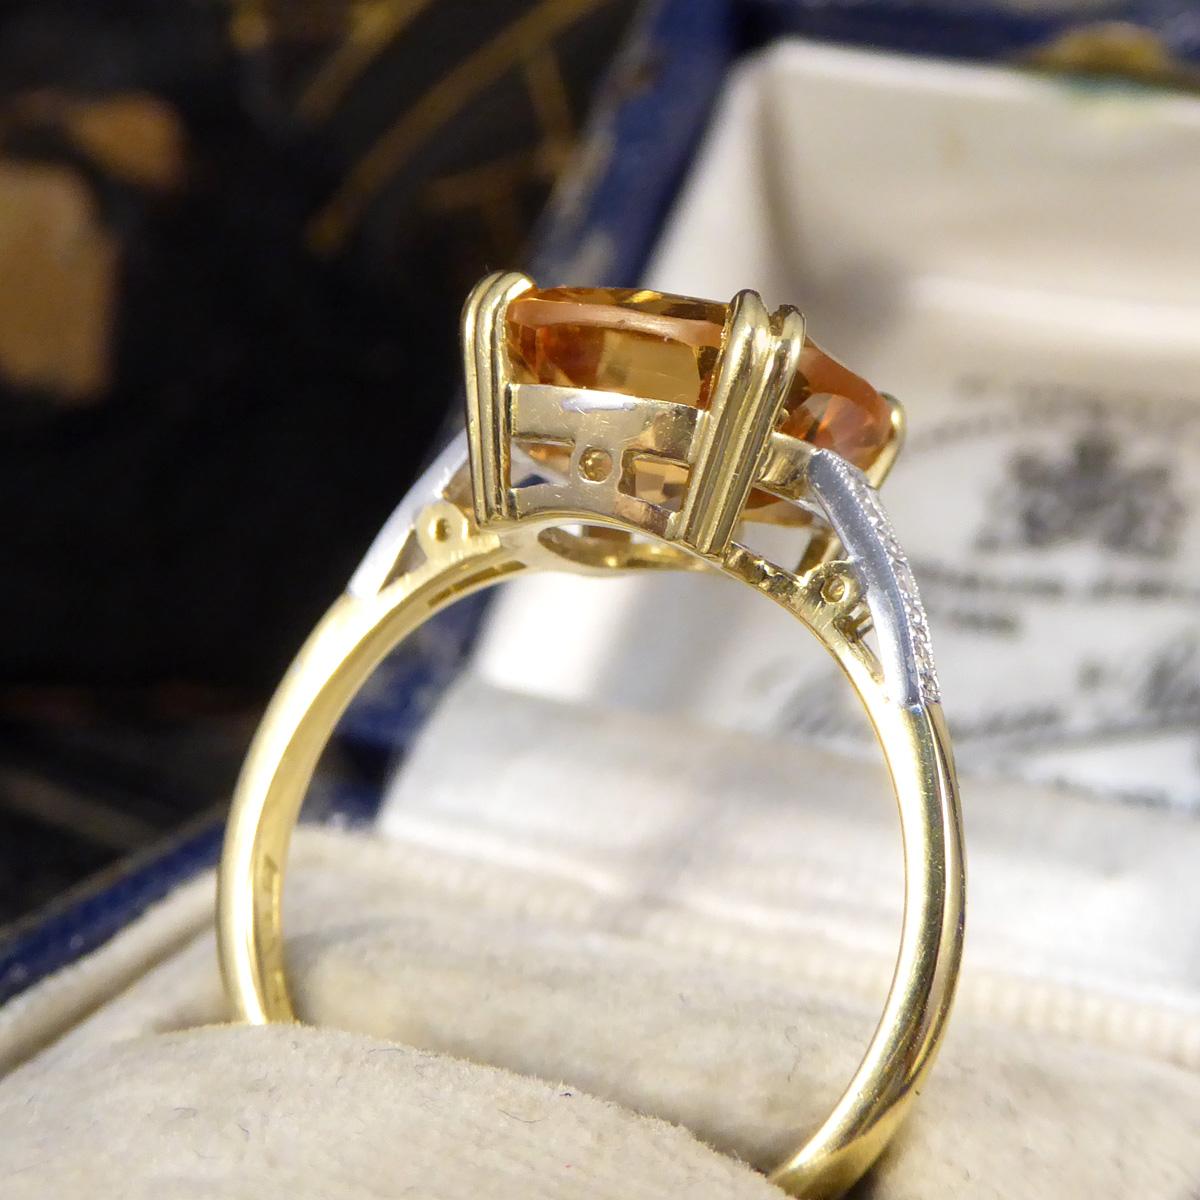 5.12ct Imperial Topaz Ring with Diamond Set Tapered Shoulders in 18ct Gold 2